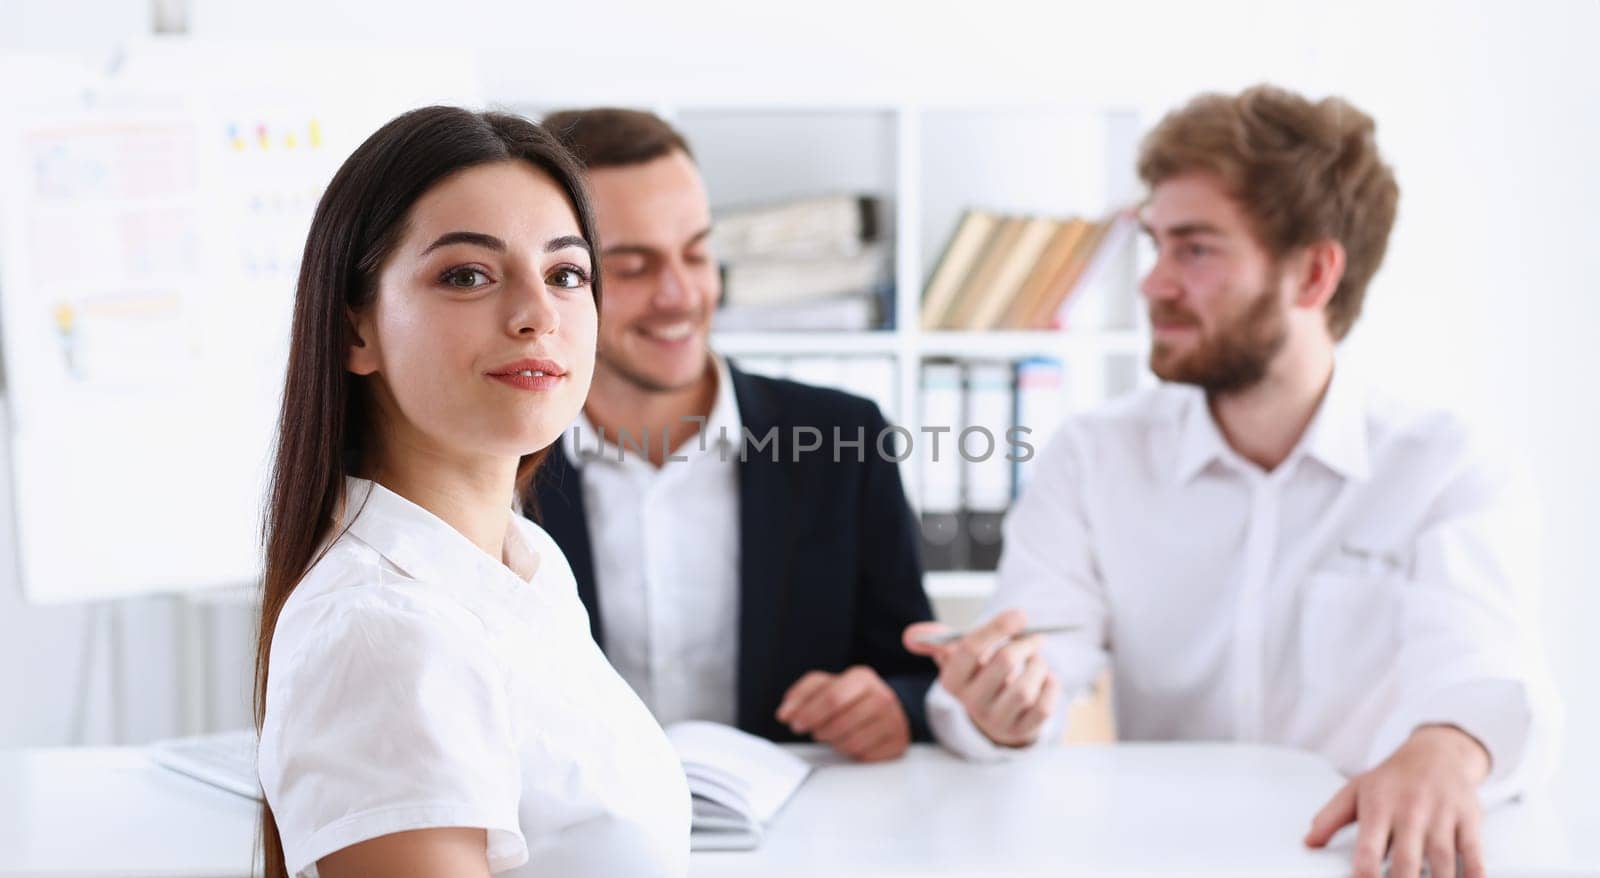 Beautiful smiling cheerful girl at workplace look in camera with colleagues group in background. White collar worker at workspace job offer modern lifestyle client visit profession train concept